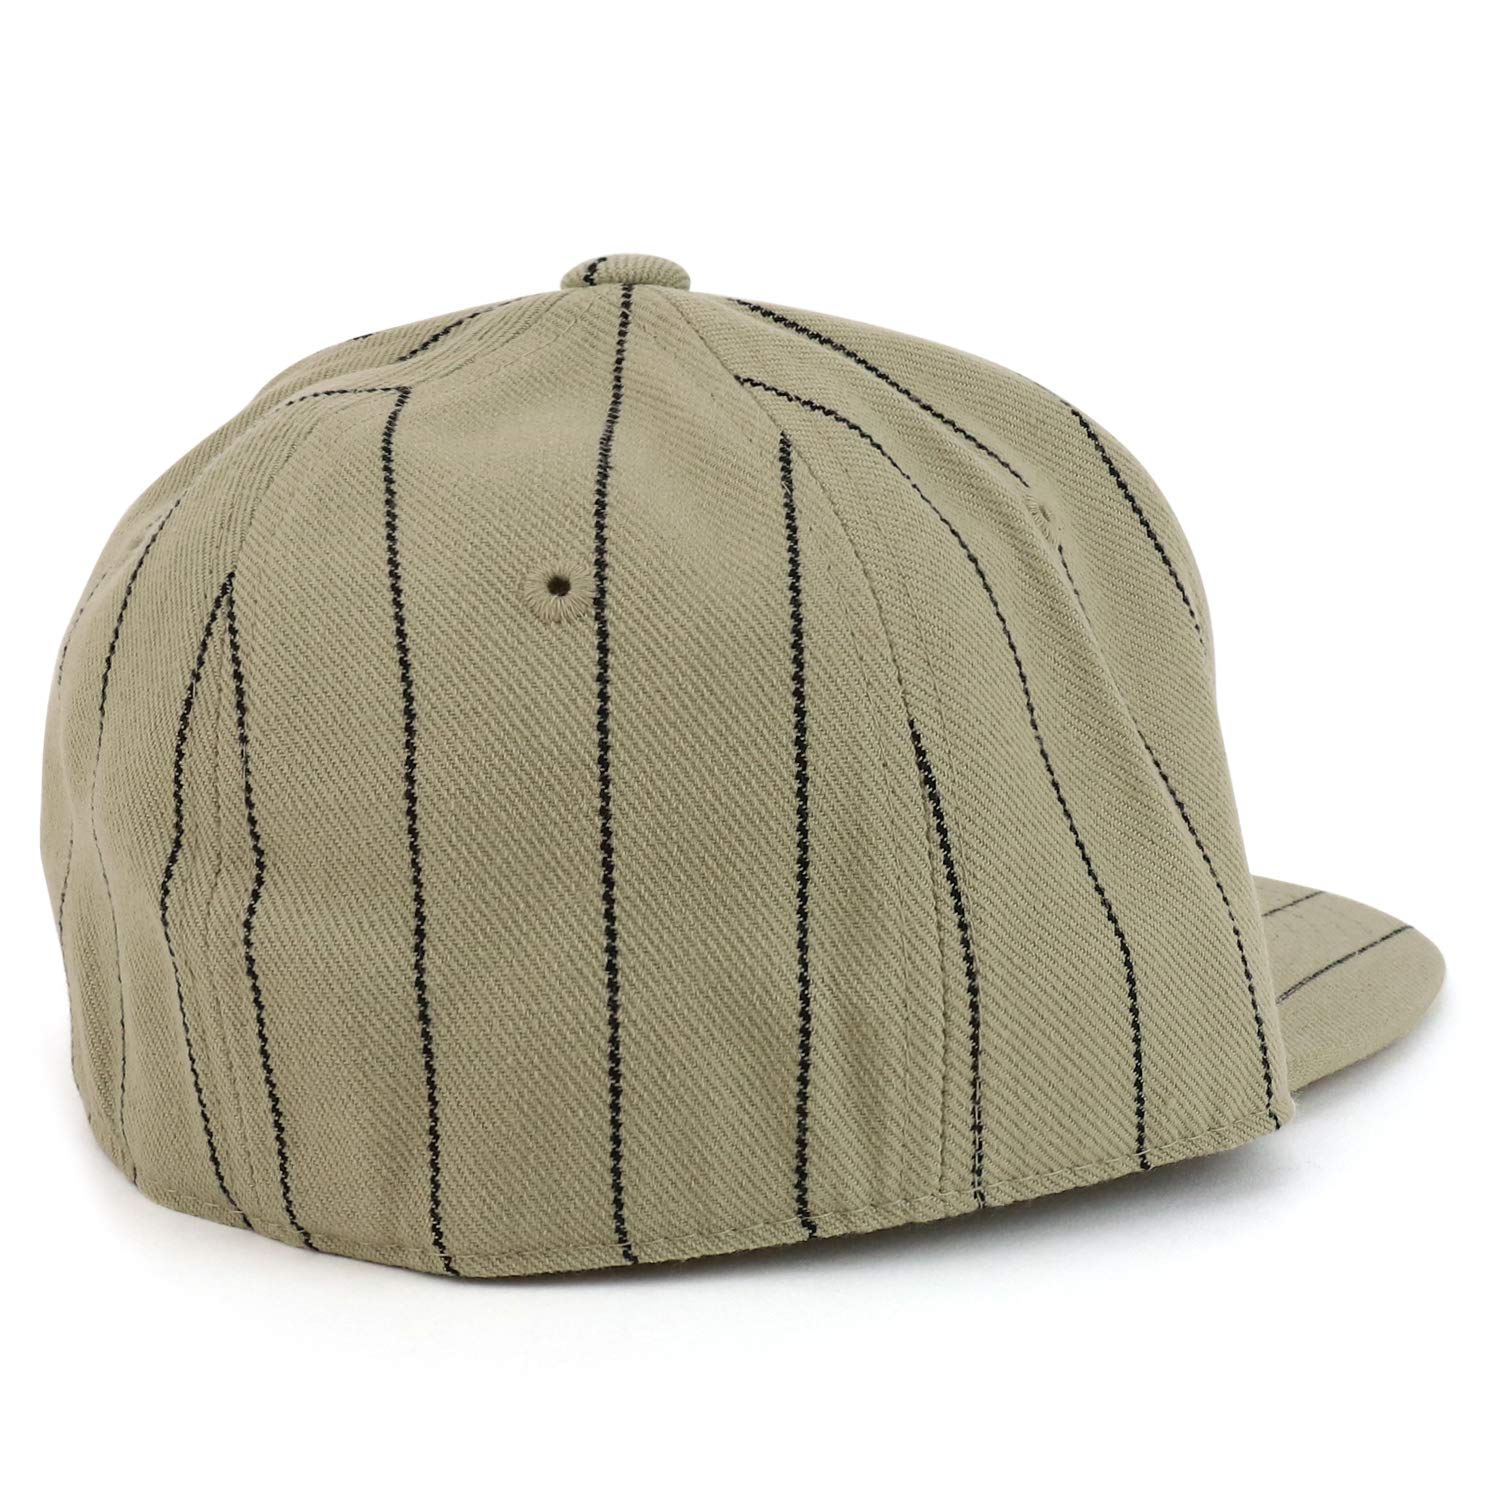 Armycrew Pin Striped Structured Flatbill Fitted Baseball Cap - Khaki - 7